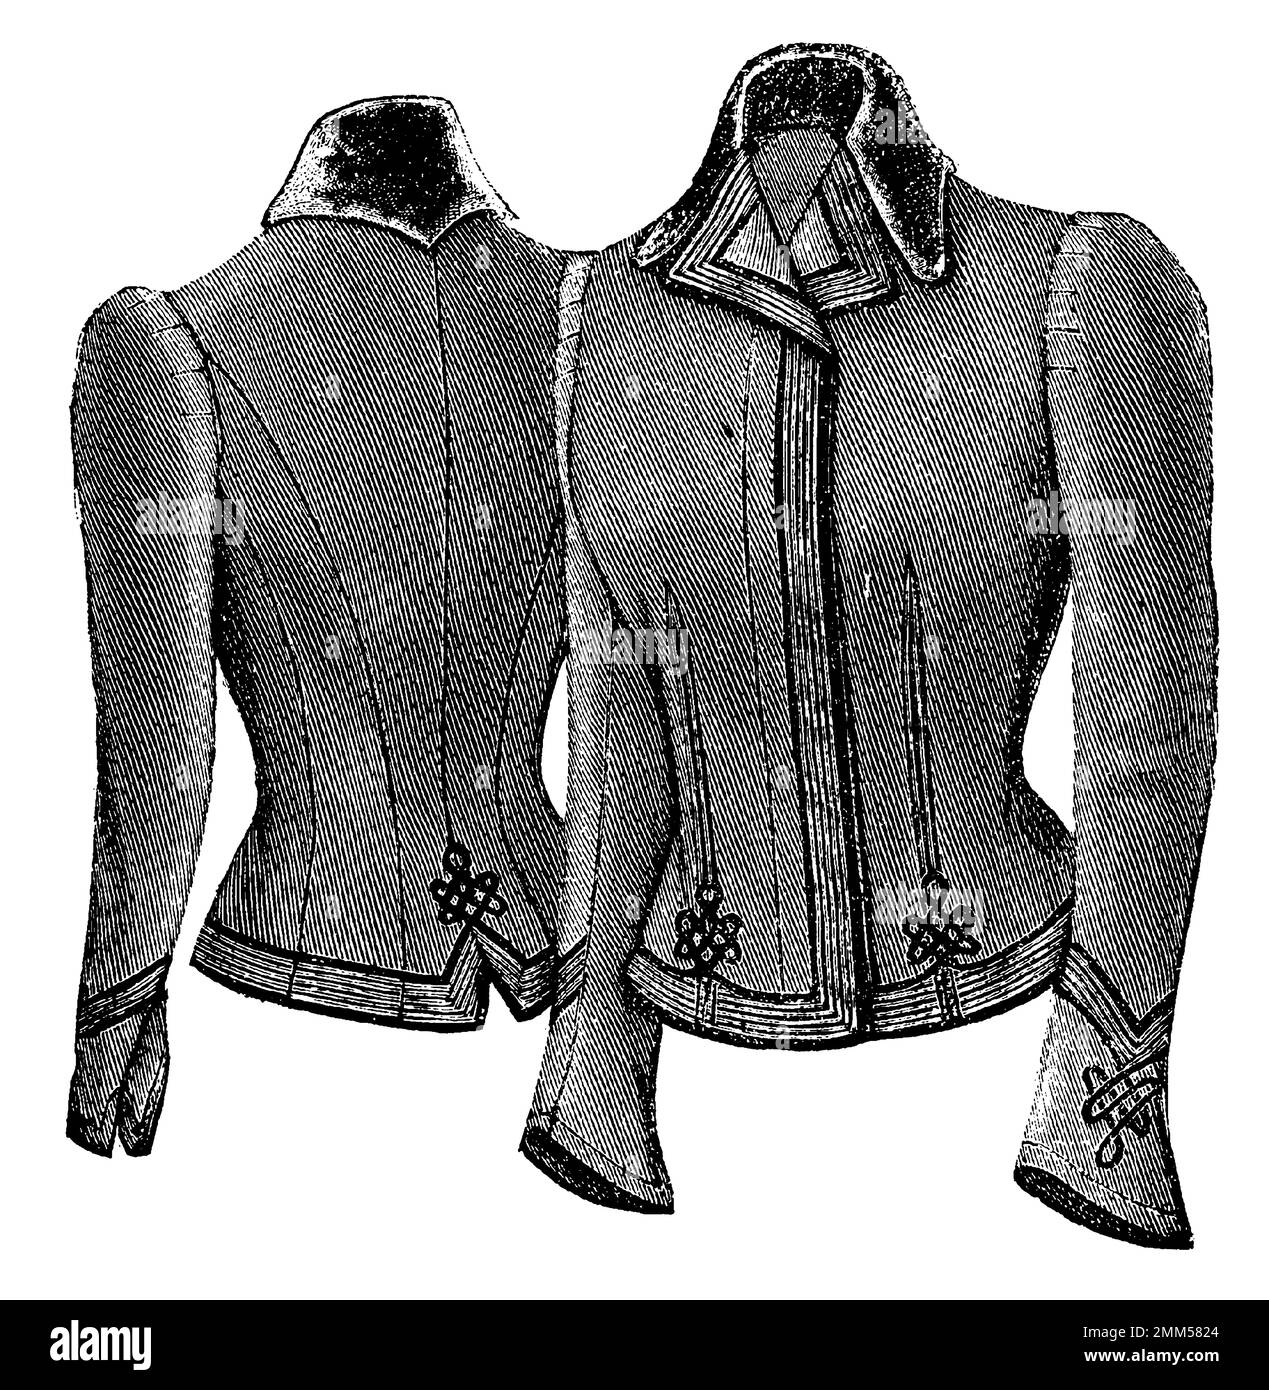 Vintage engraving of a portrait of a Victorian jacket (isolated on white). Published in Systematischer Bilder-Atlas zum Conversations-Lexikon, Ikonogr Stock Photo